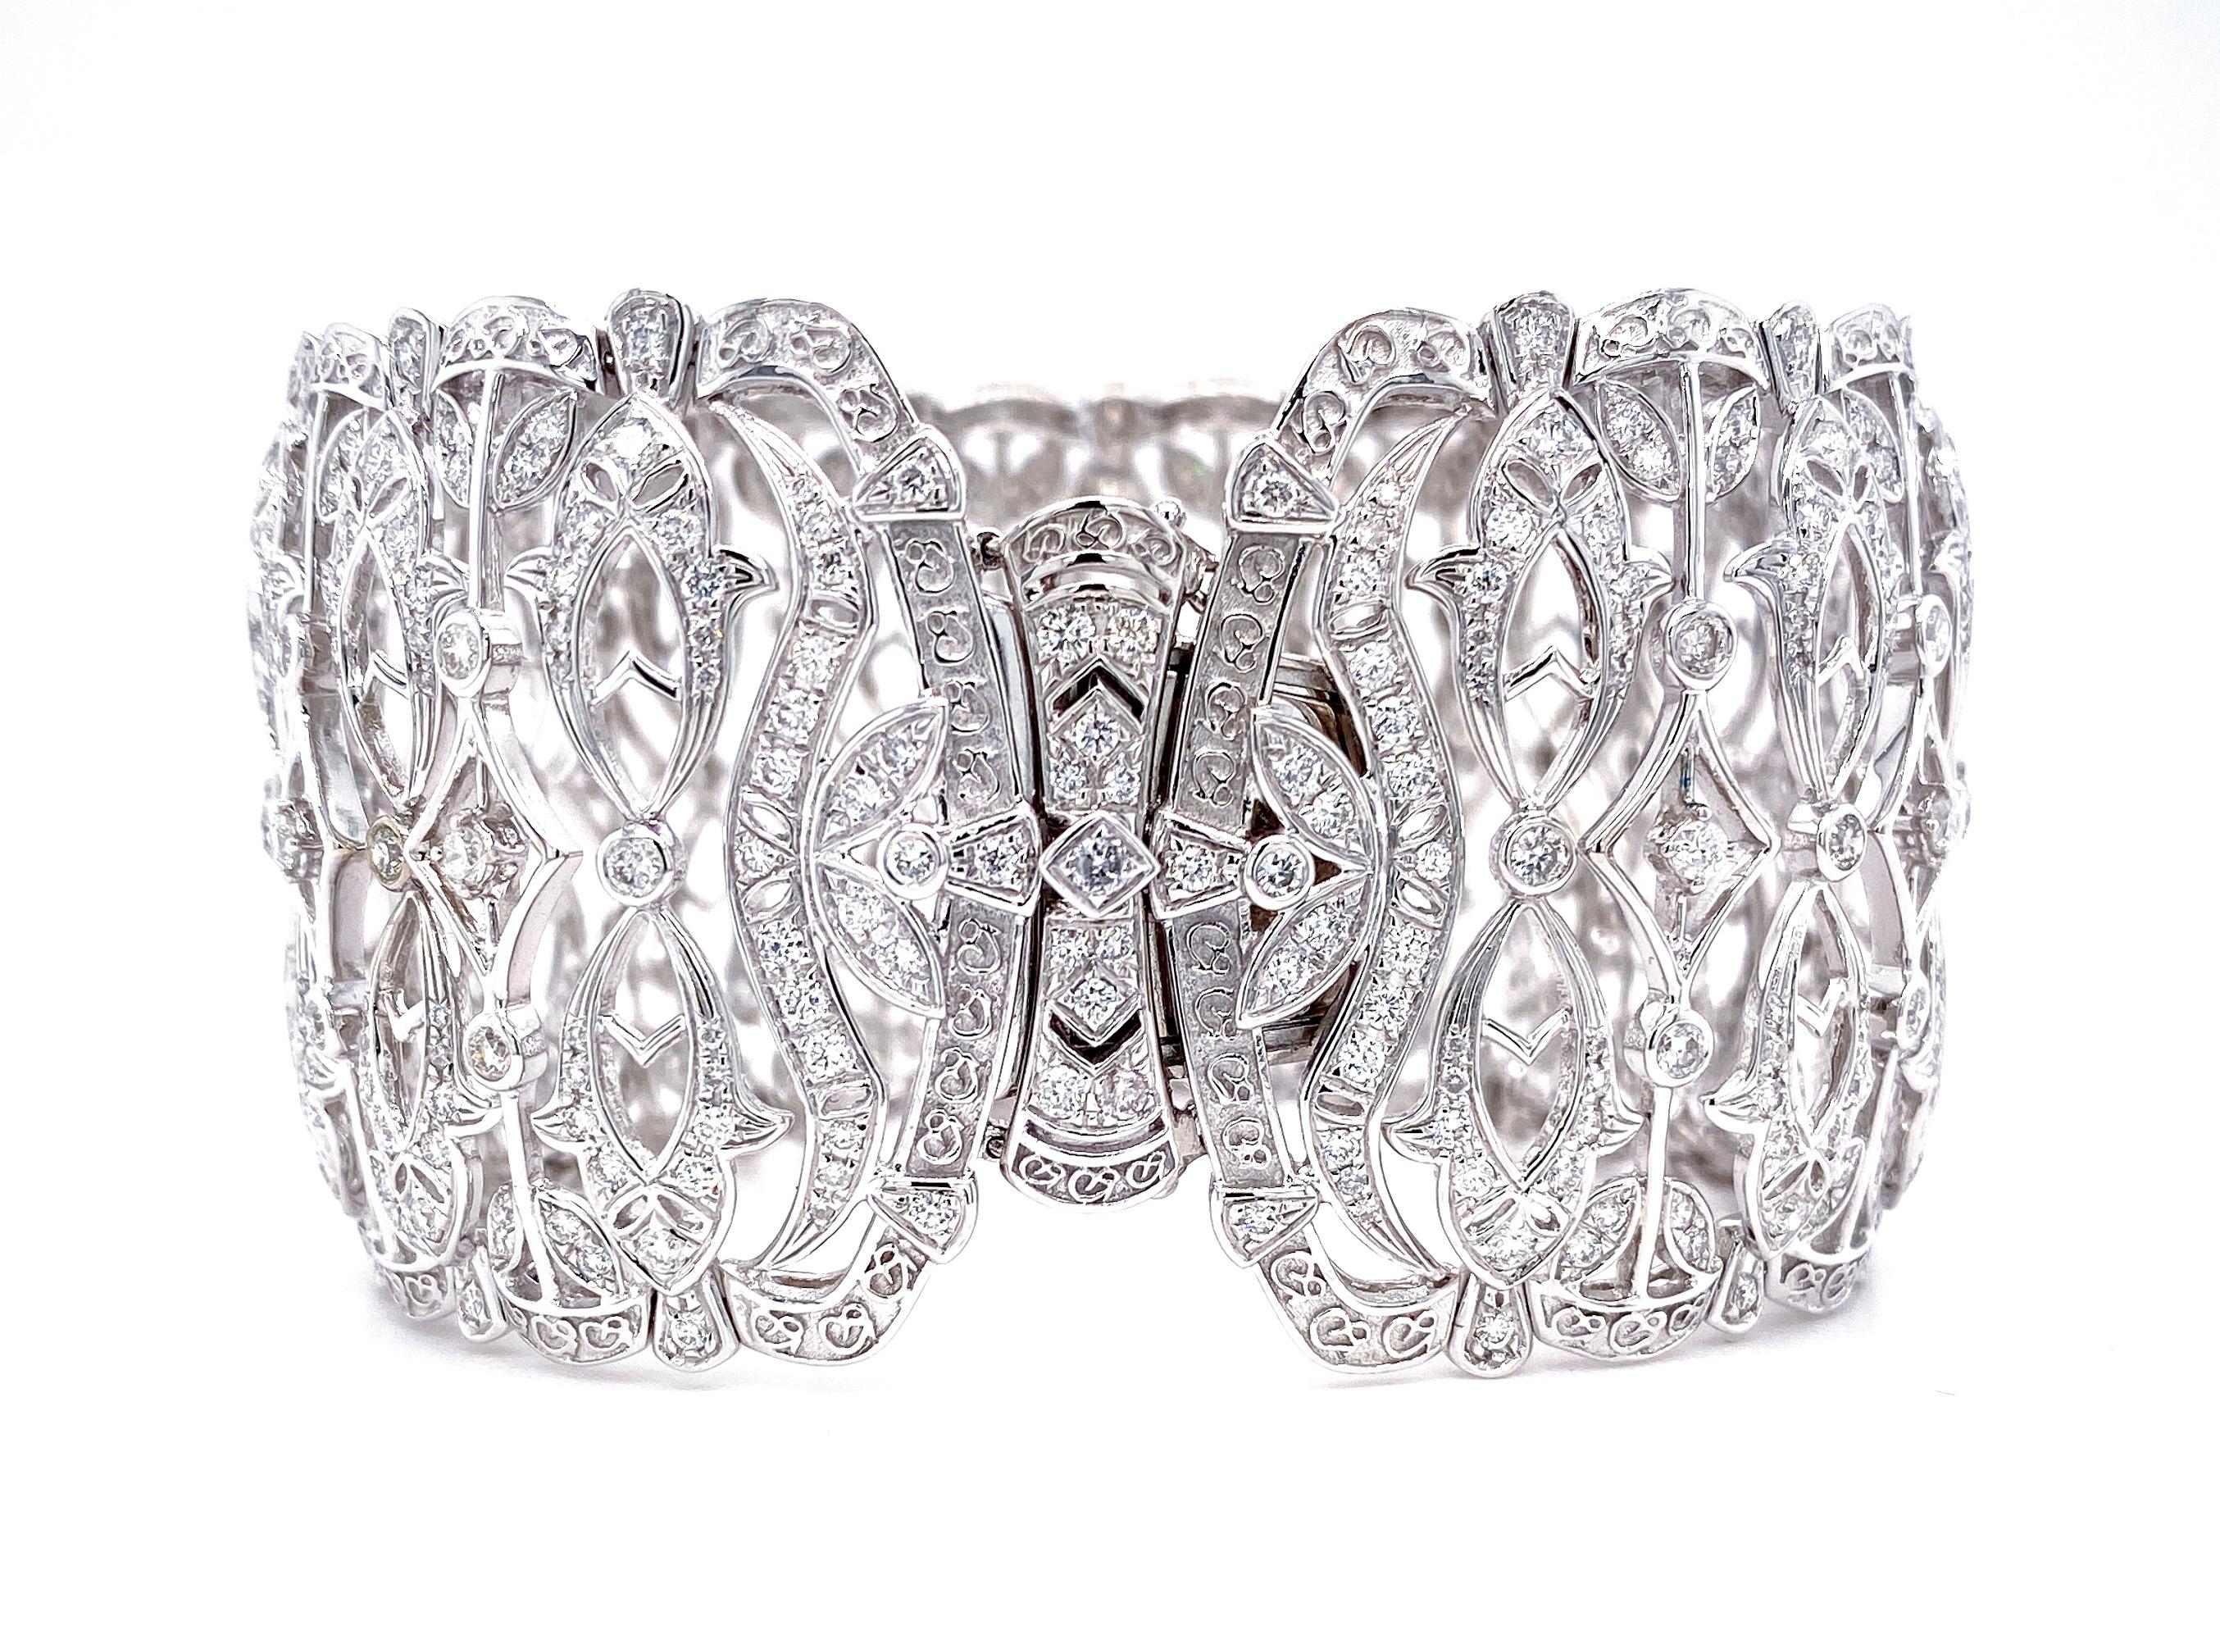 Round Cut Lace Inspired Diamond Bangle Bracelet in 18 Karat White Gold For Sale